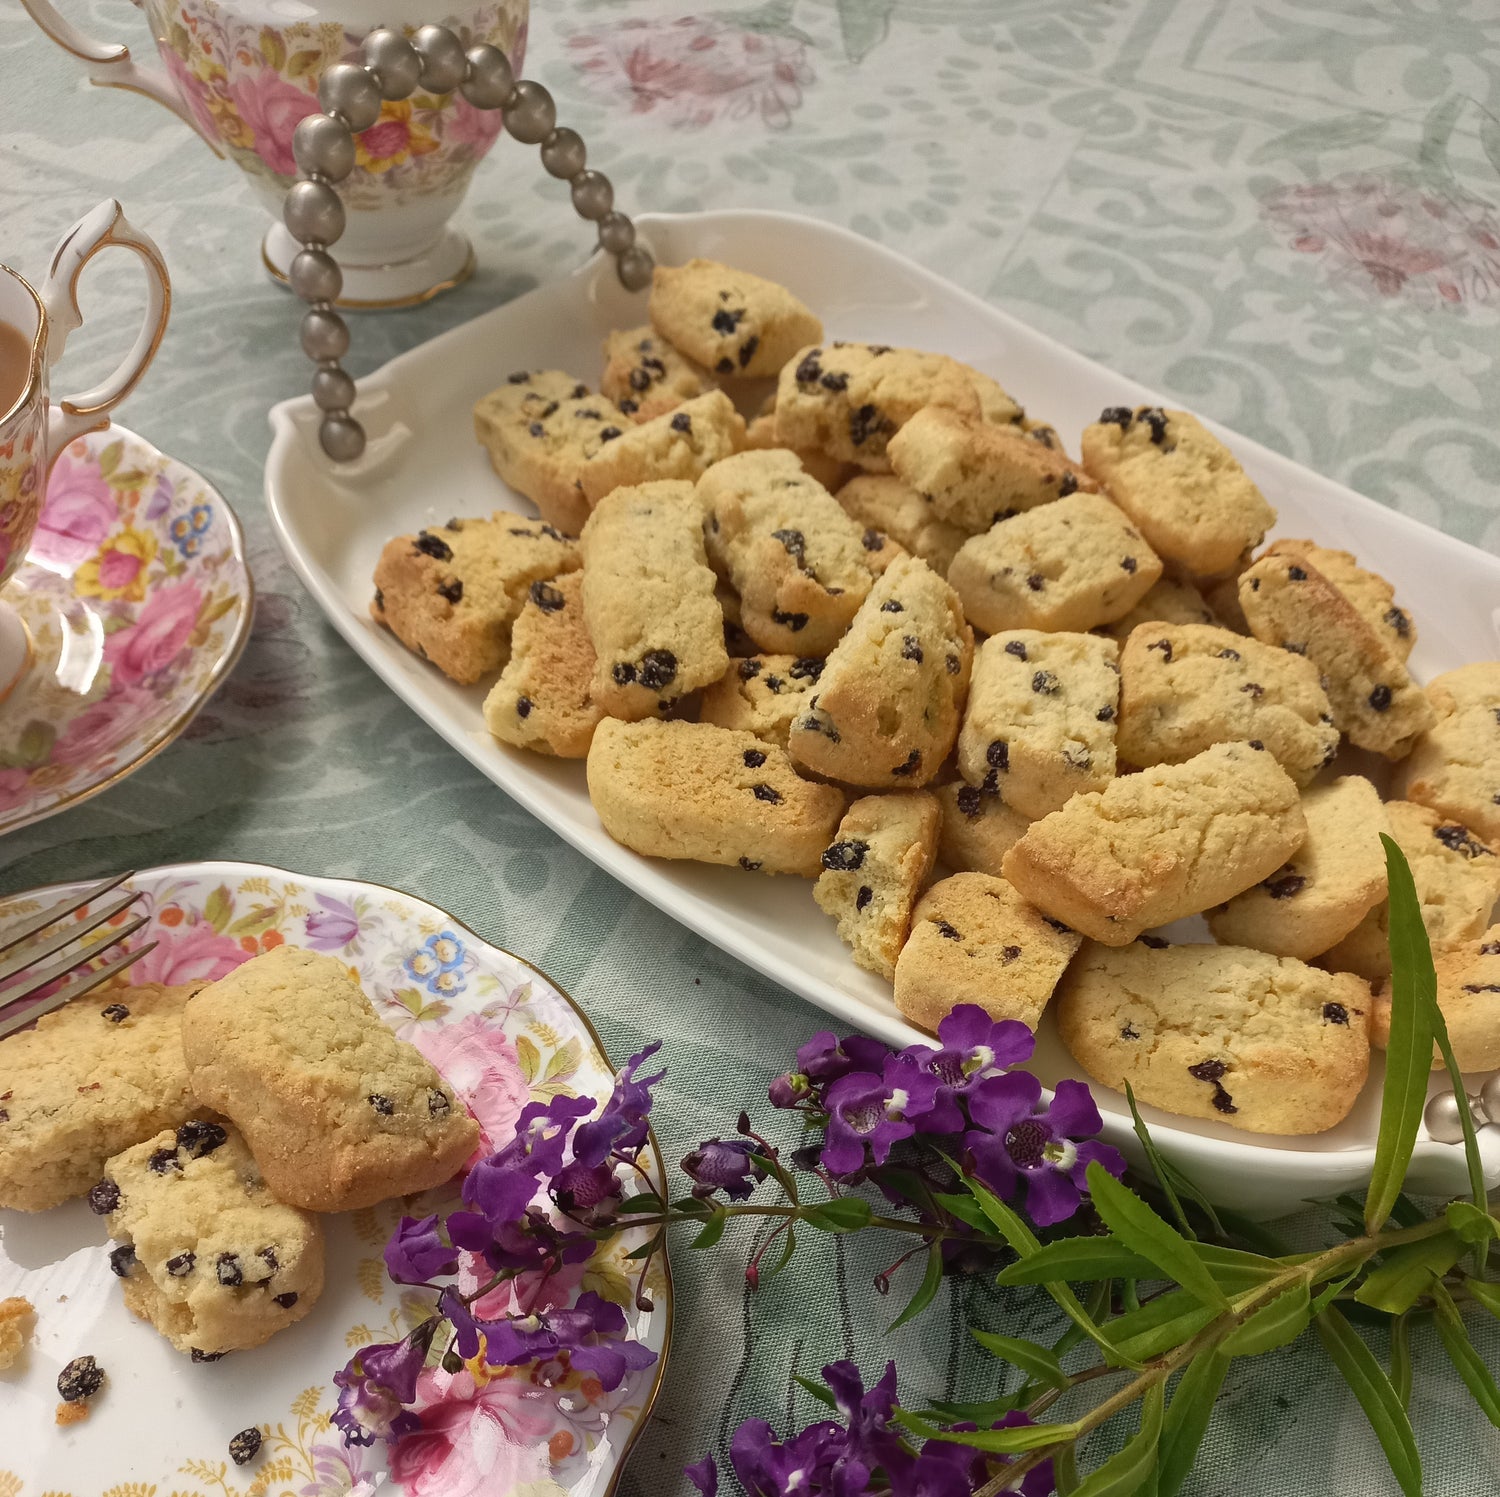 American Cookies. Gluten-free biscuits was made gluten-free and dairy-free with Coleman Royal Bakeries Gluten-free Plain Flour (certified gluten-free). Printable recipe available on the site